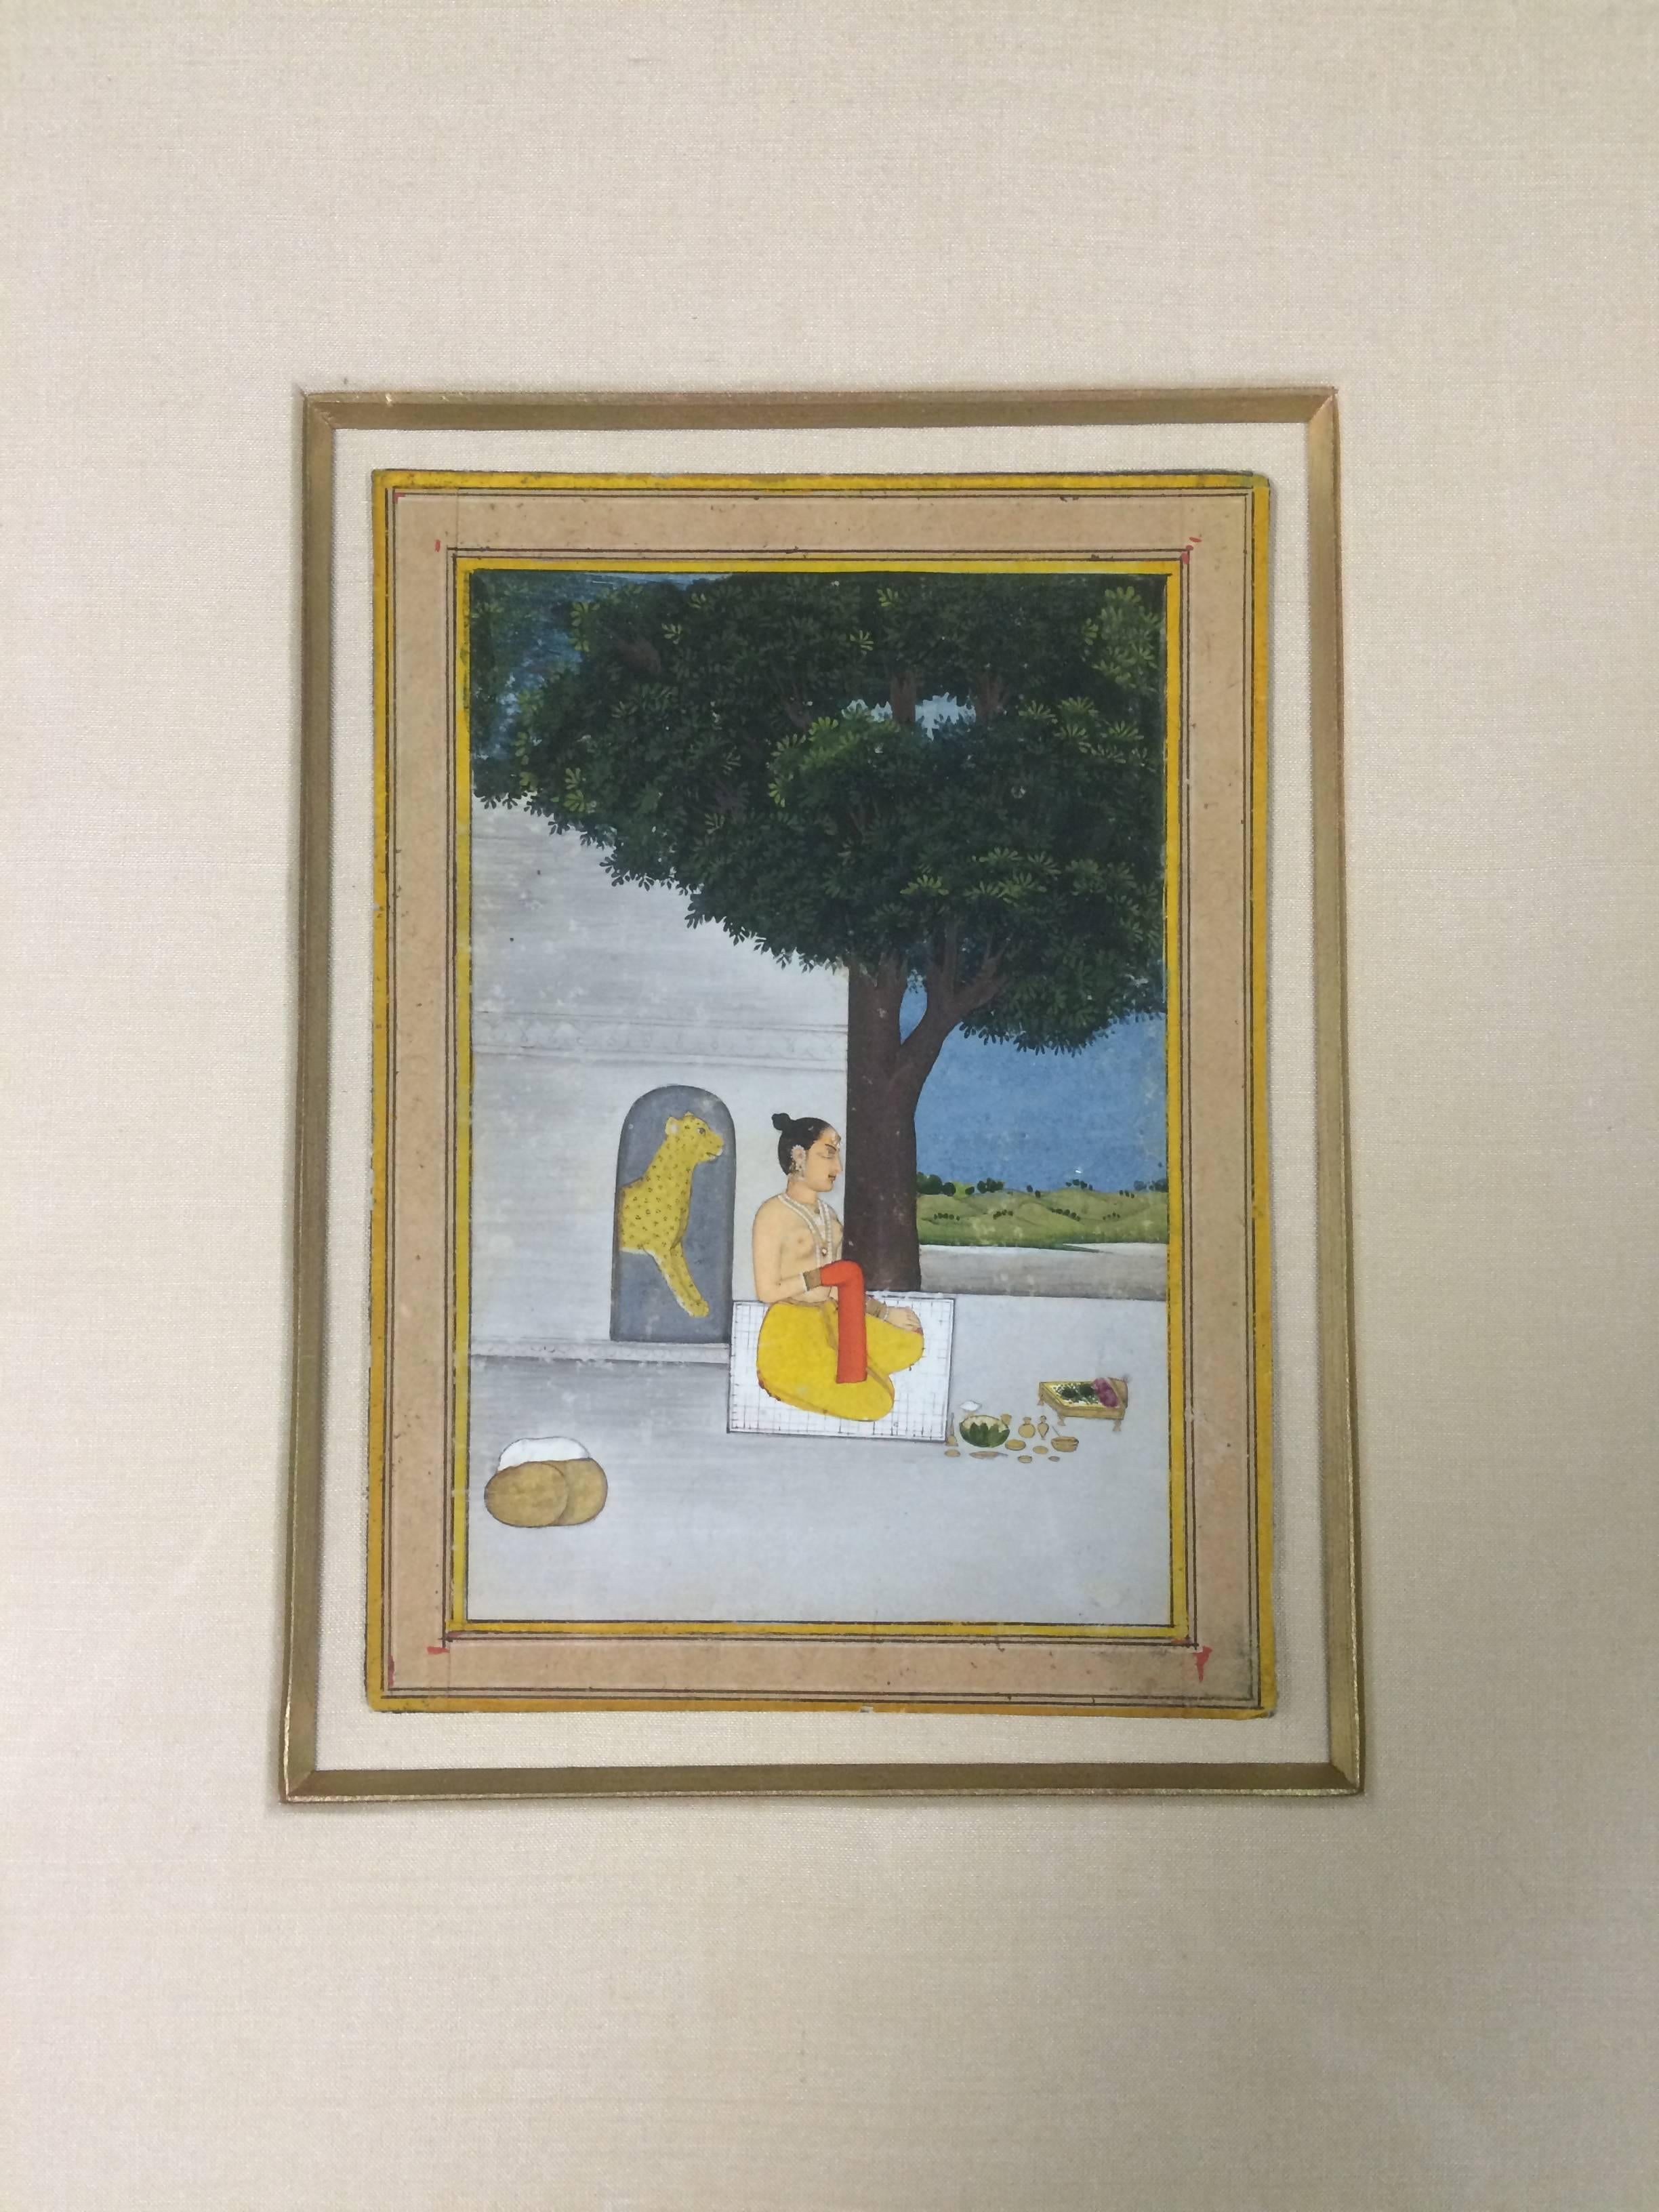 18th Century Indian Watercolor From a Ragamala Series